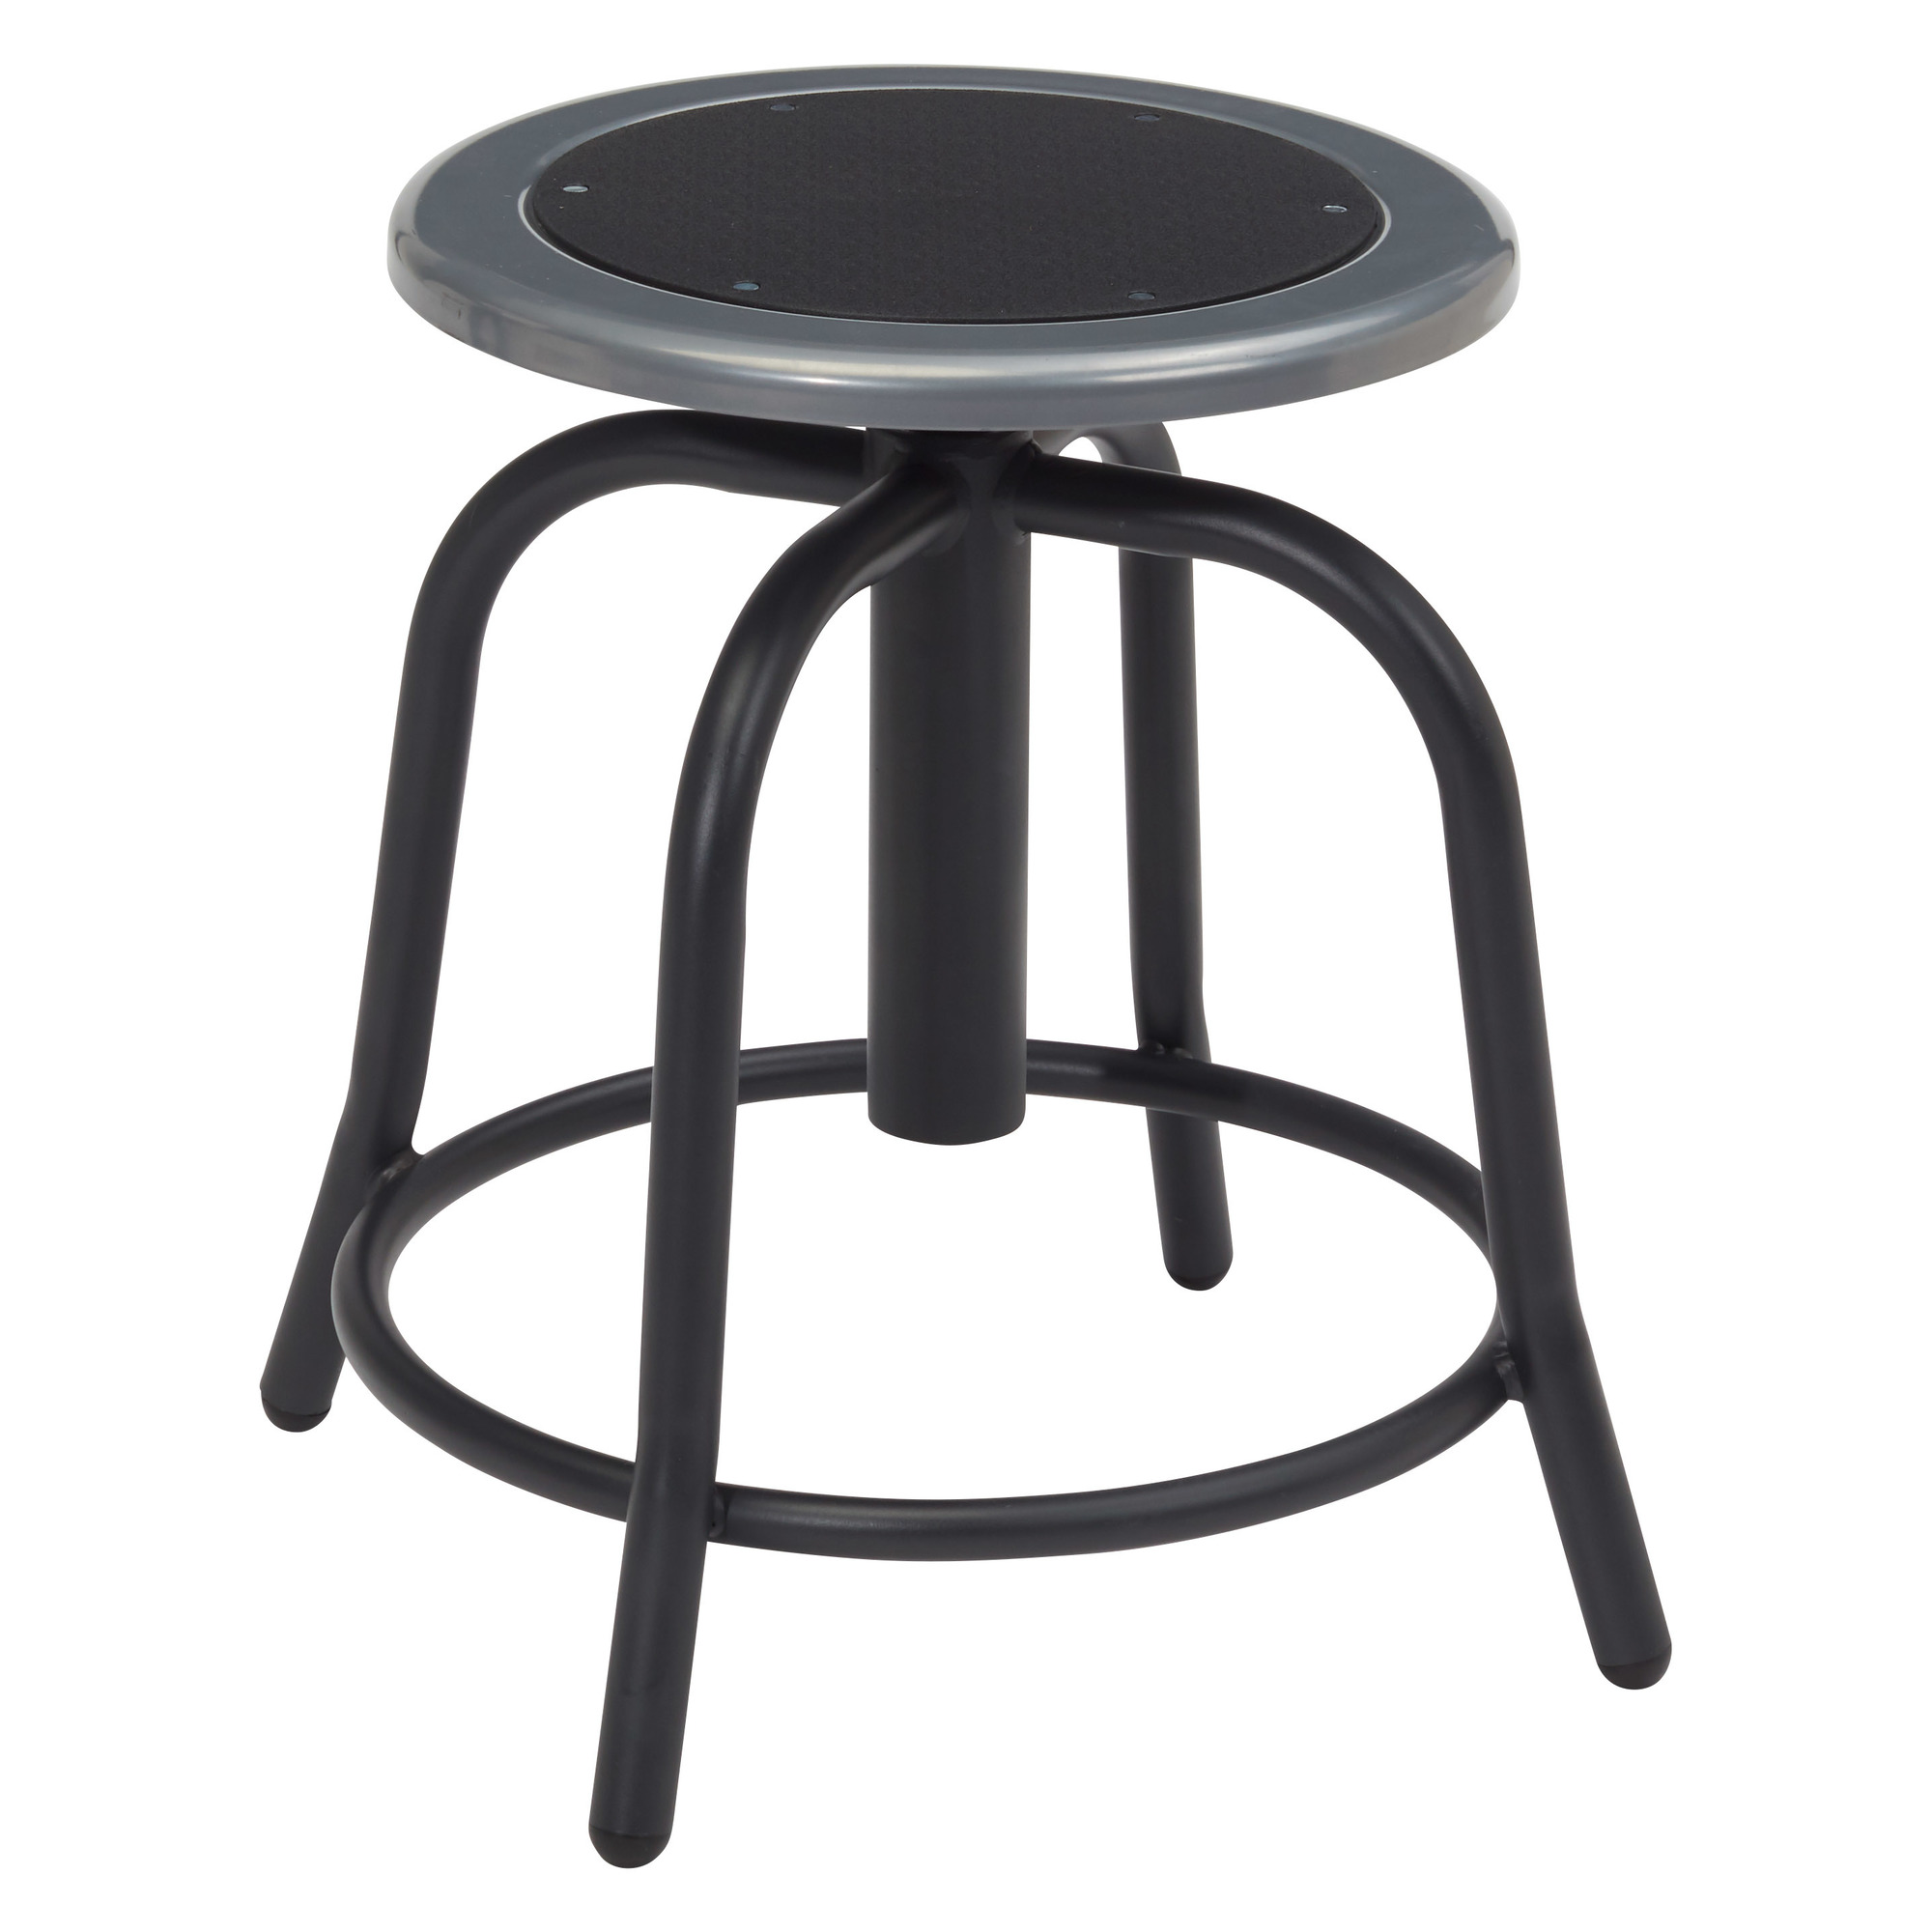 National Public Seating, 18â - 24â Height Adjust Swivel Stool, Primary Color Black, Included (qty.) 1, Seating Type Office Stool, Model 6810-10